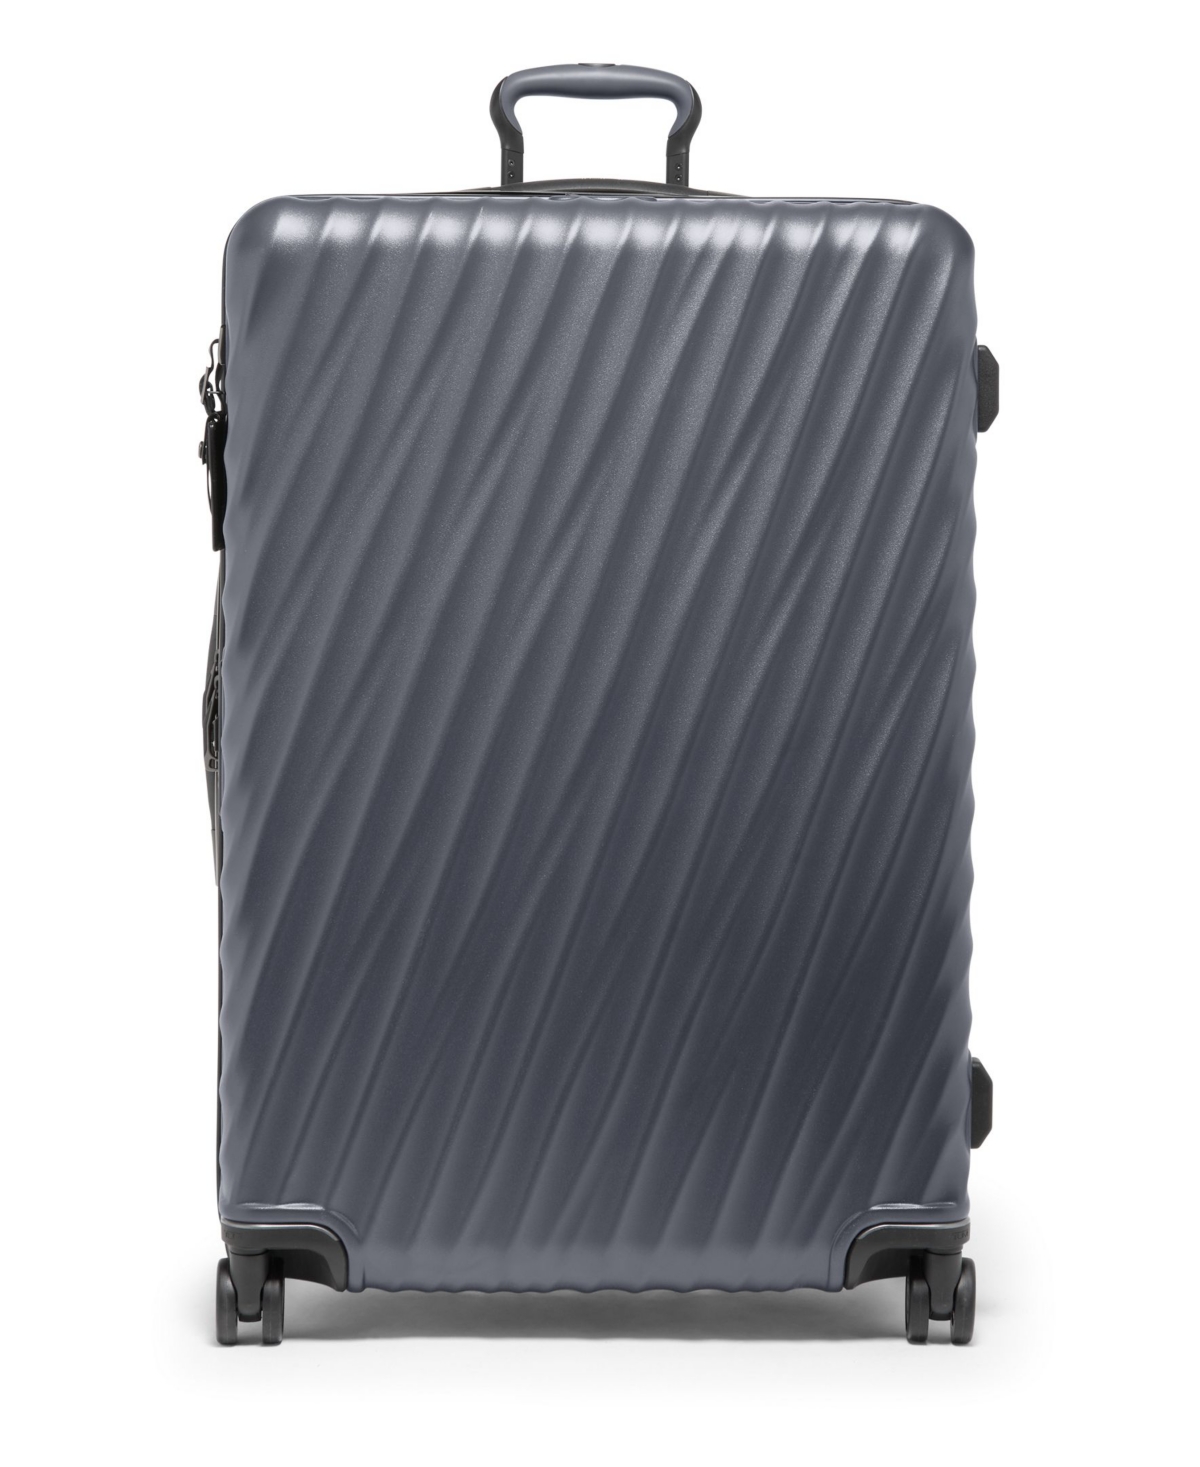 Tumi 19 Degree Extended Trip Expandable 4 Wheeled Packing Case In Gray Texture